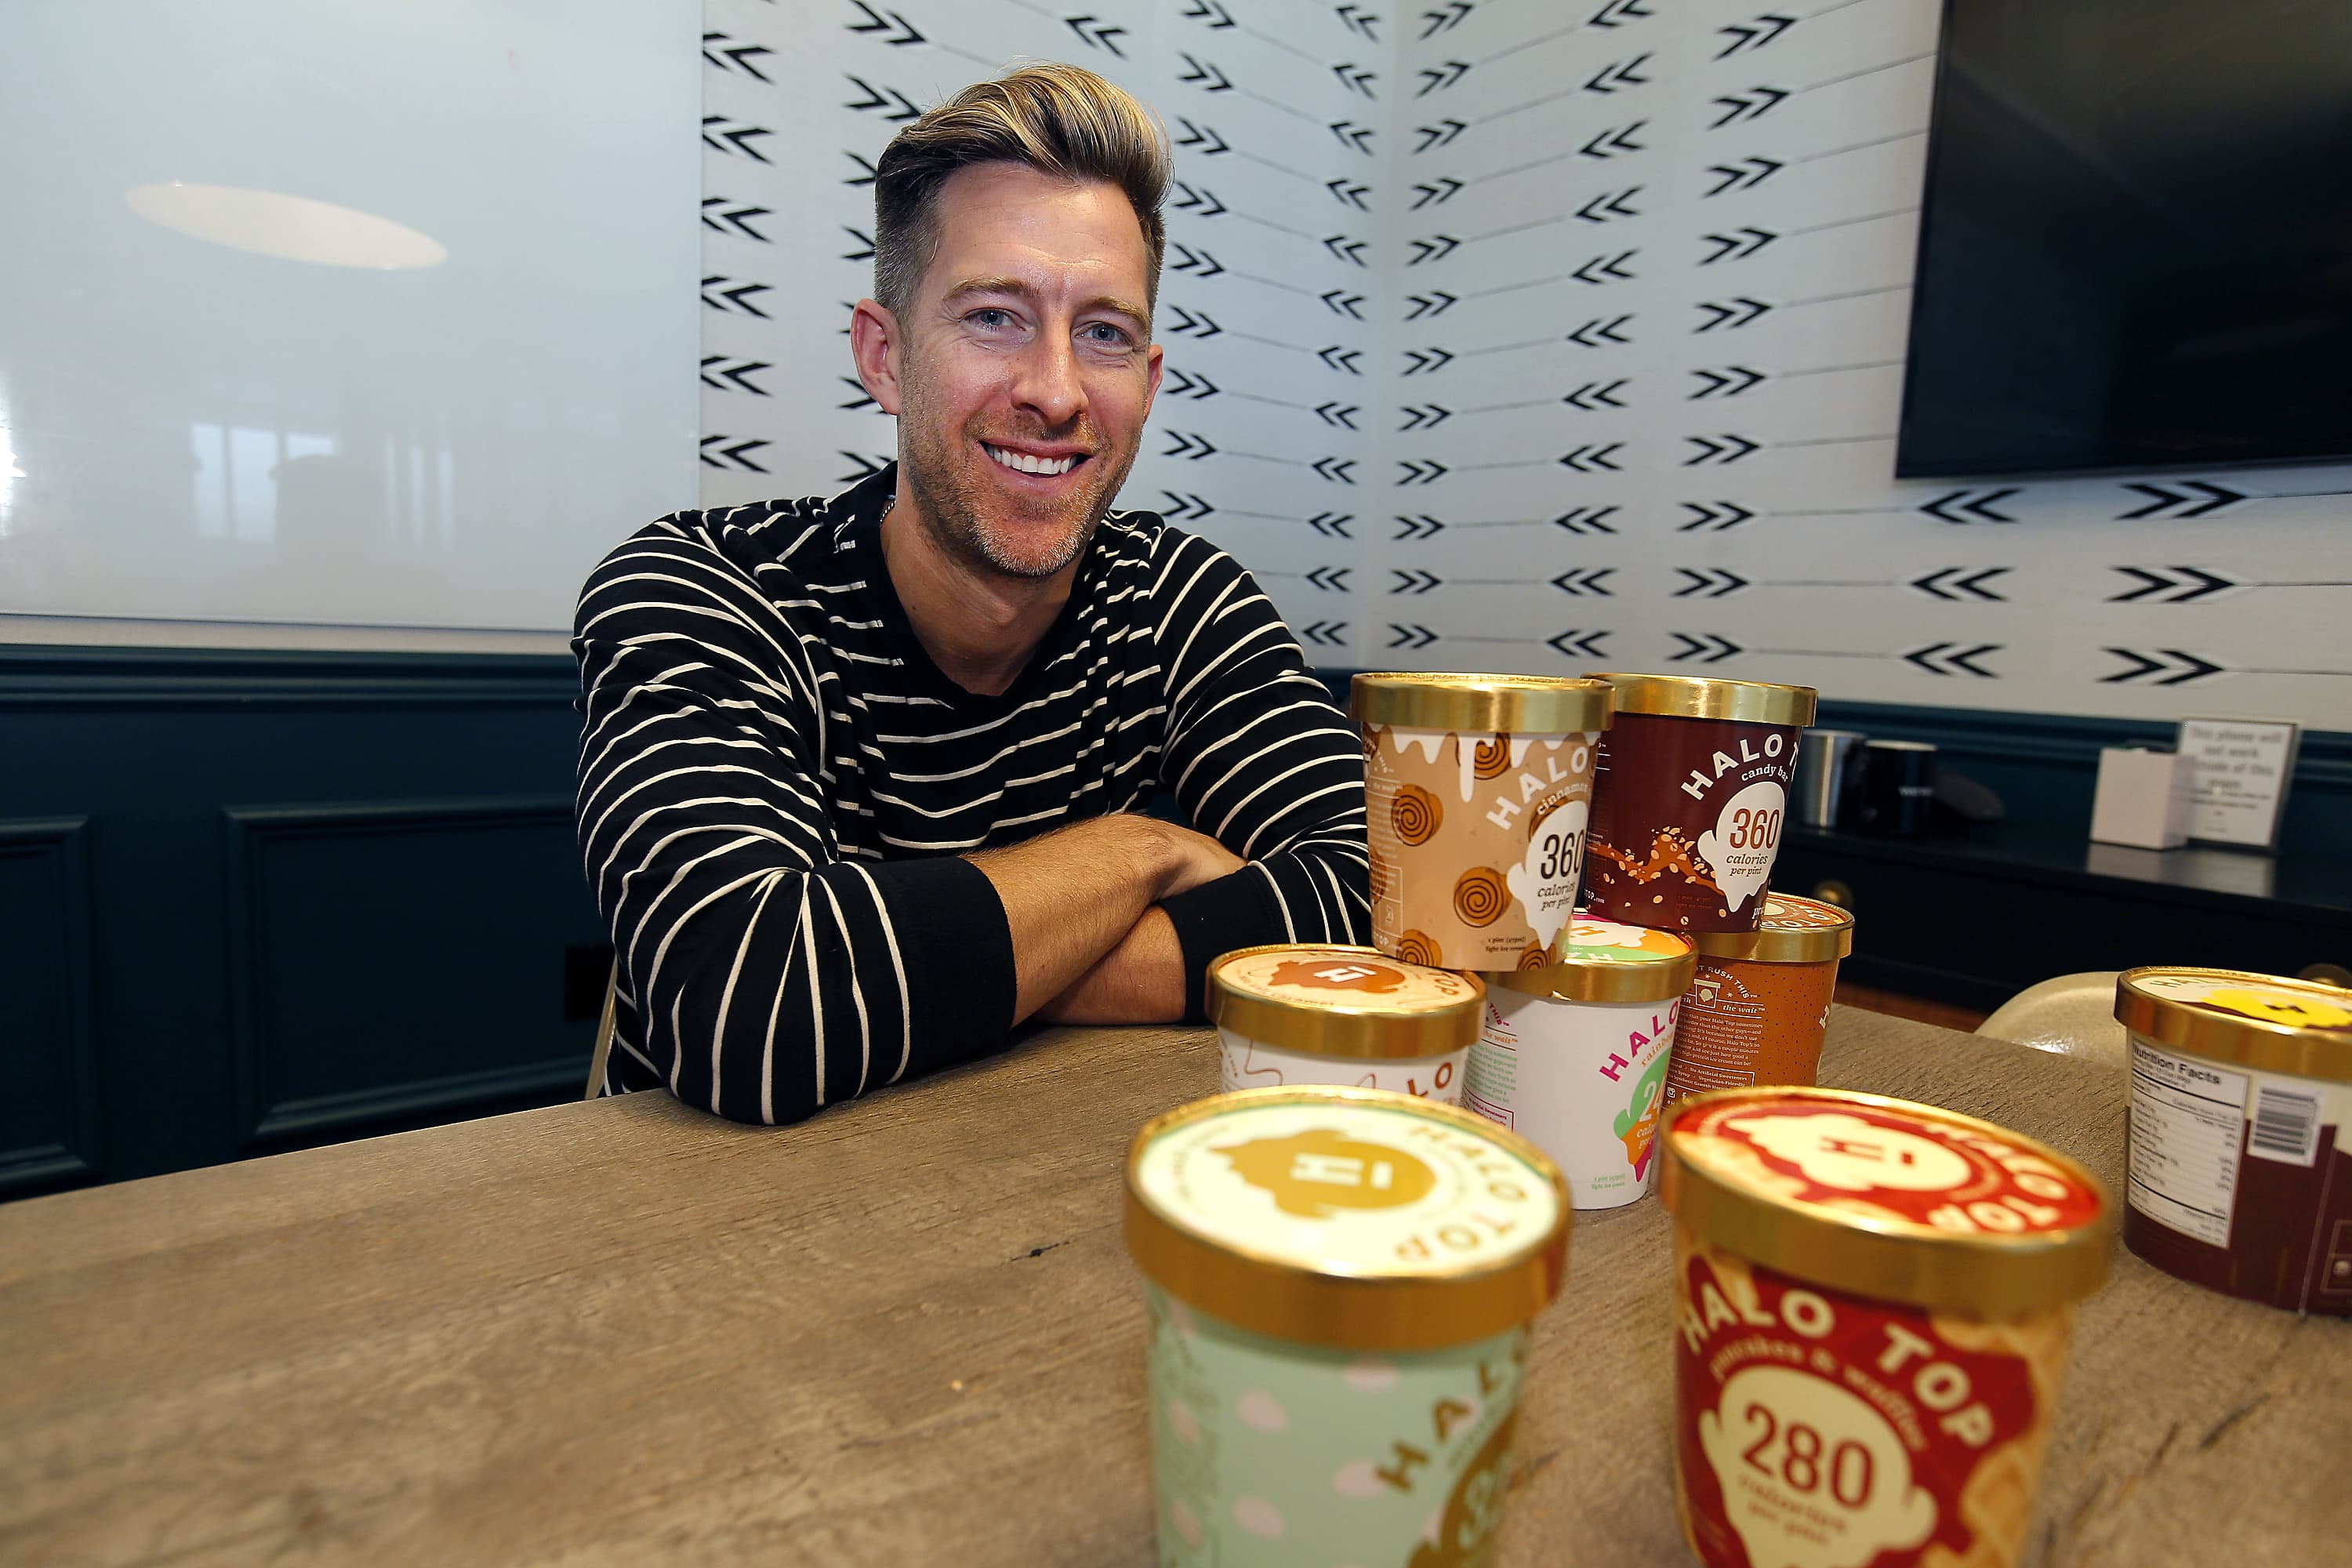 Halo Top beat Ben & Jerry's, brings in hundreds of millions in sales